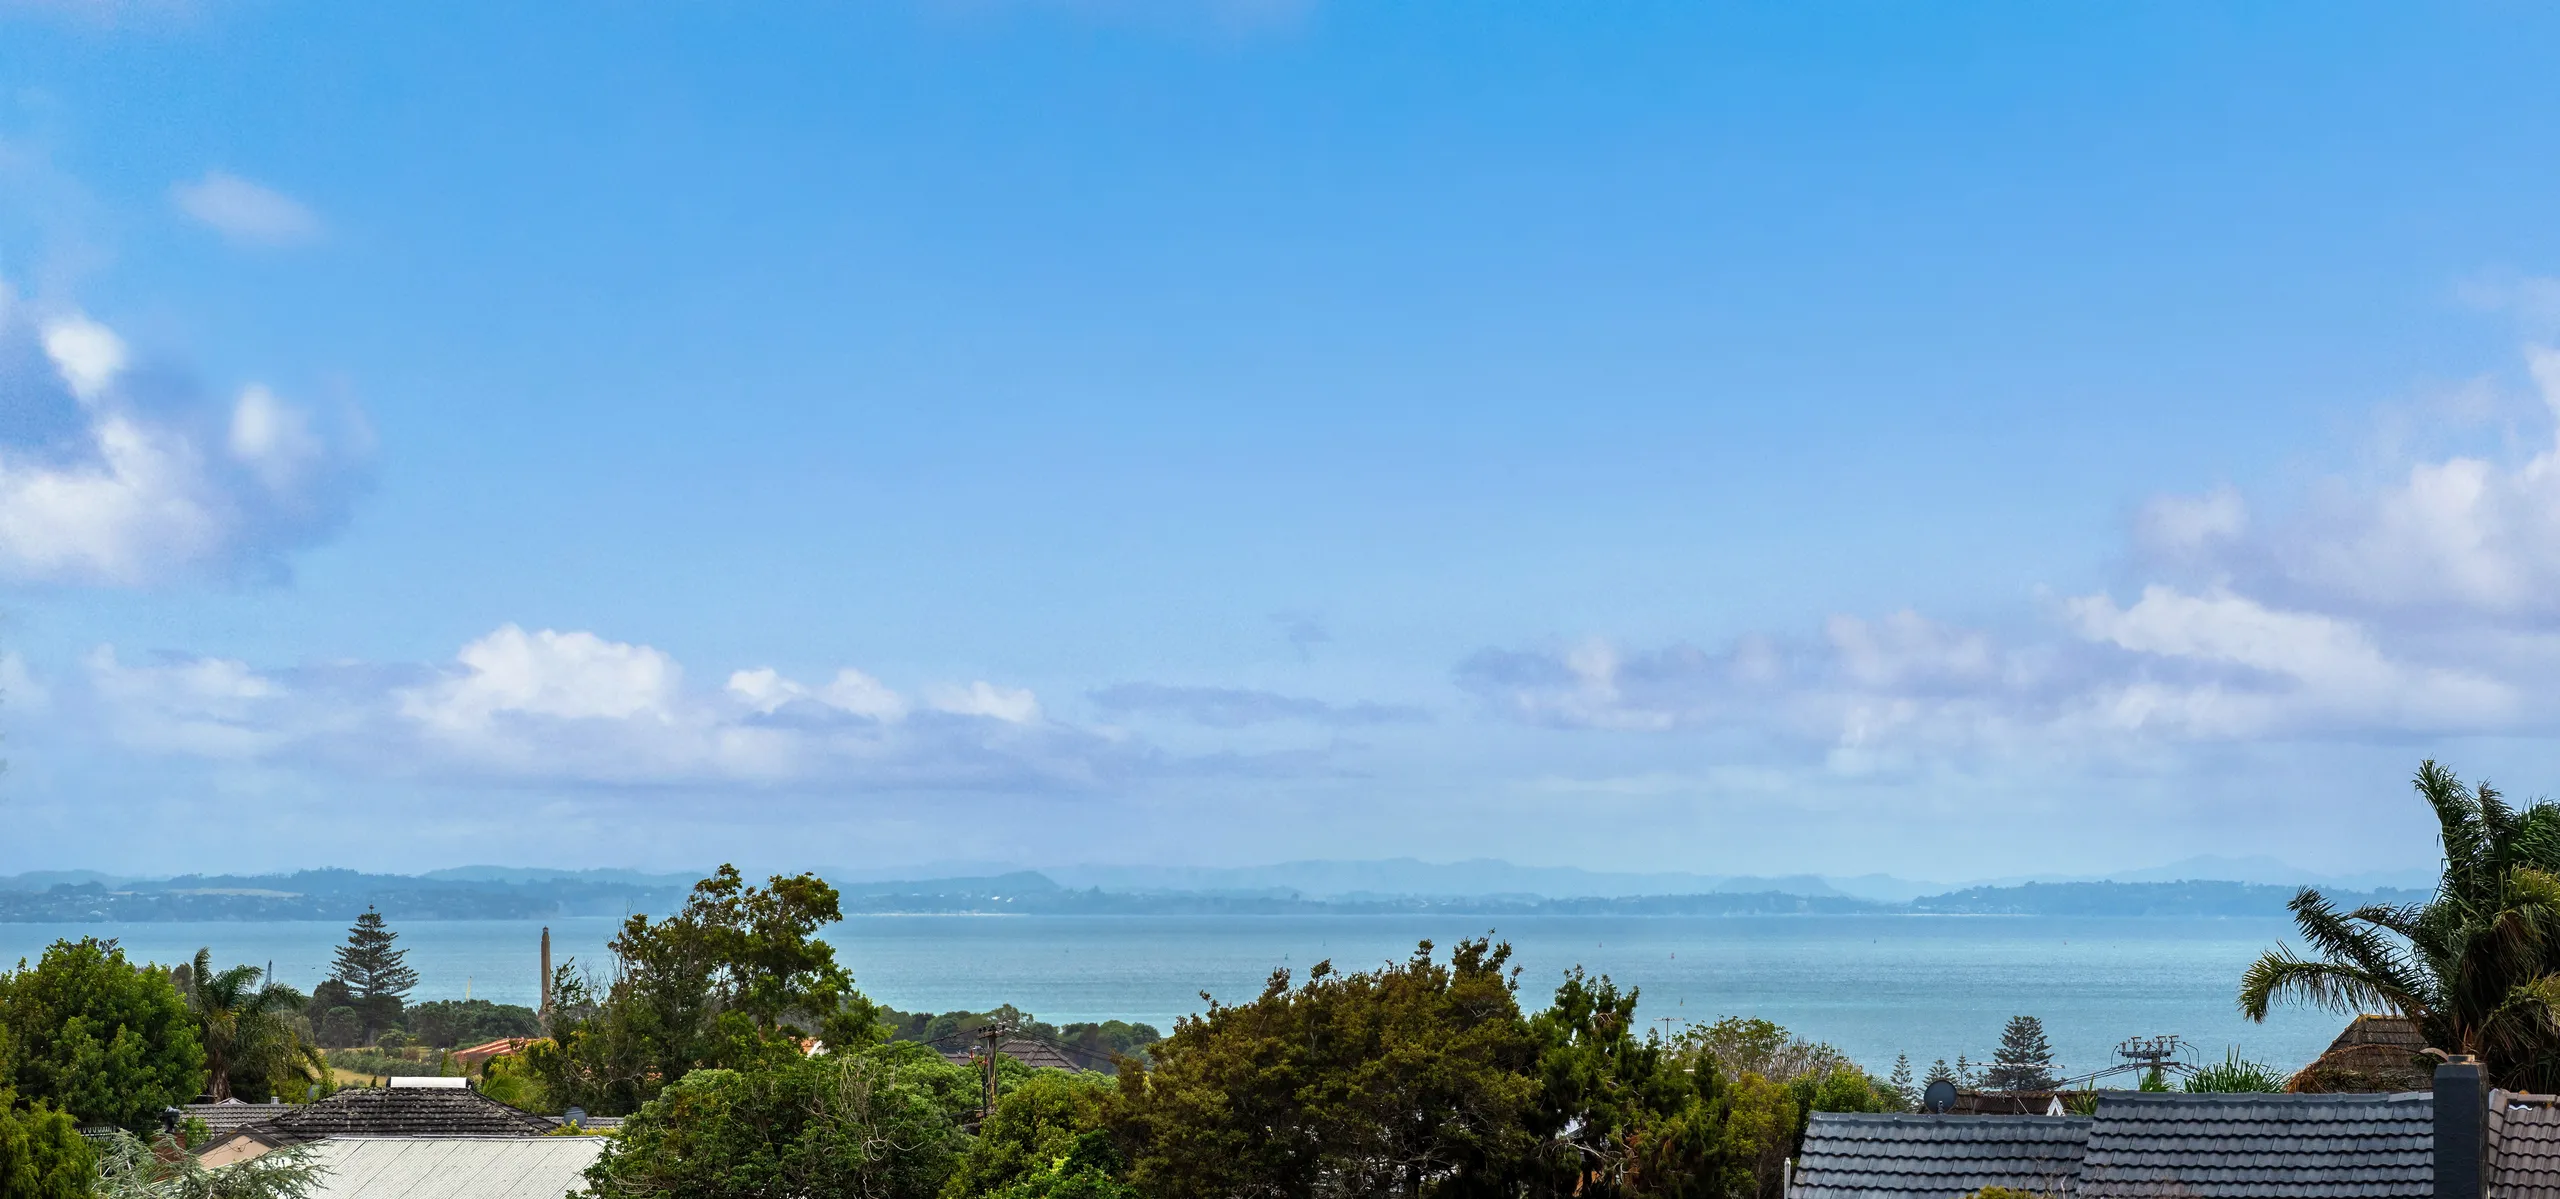 101/250 Kepa Road, Mission Bay, Auckland City